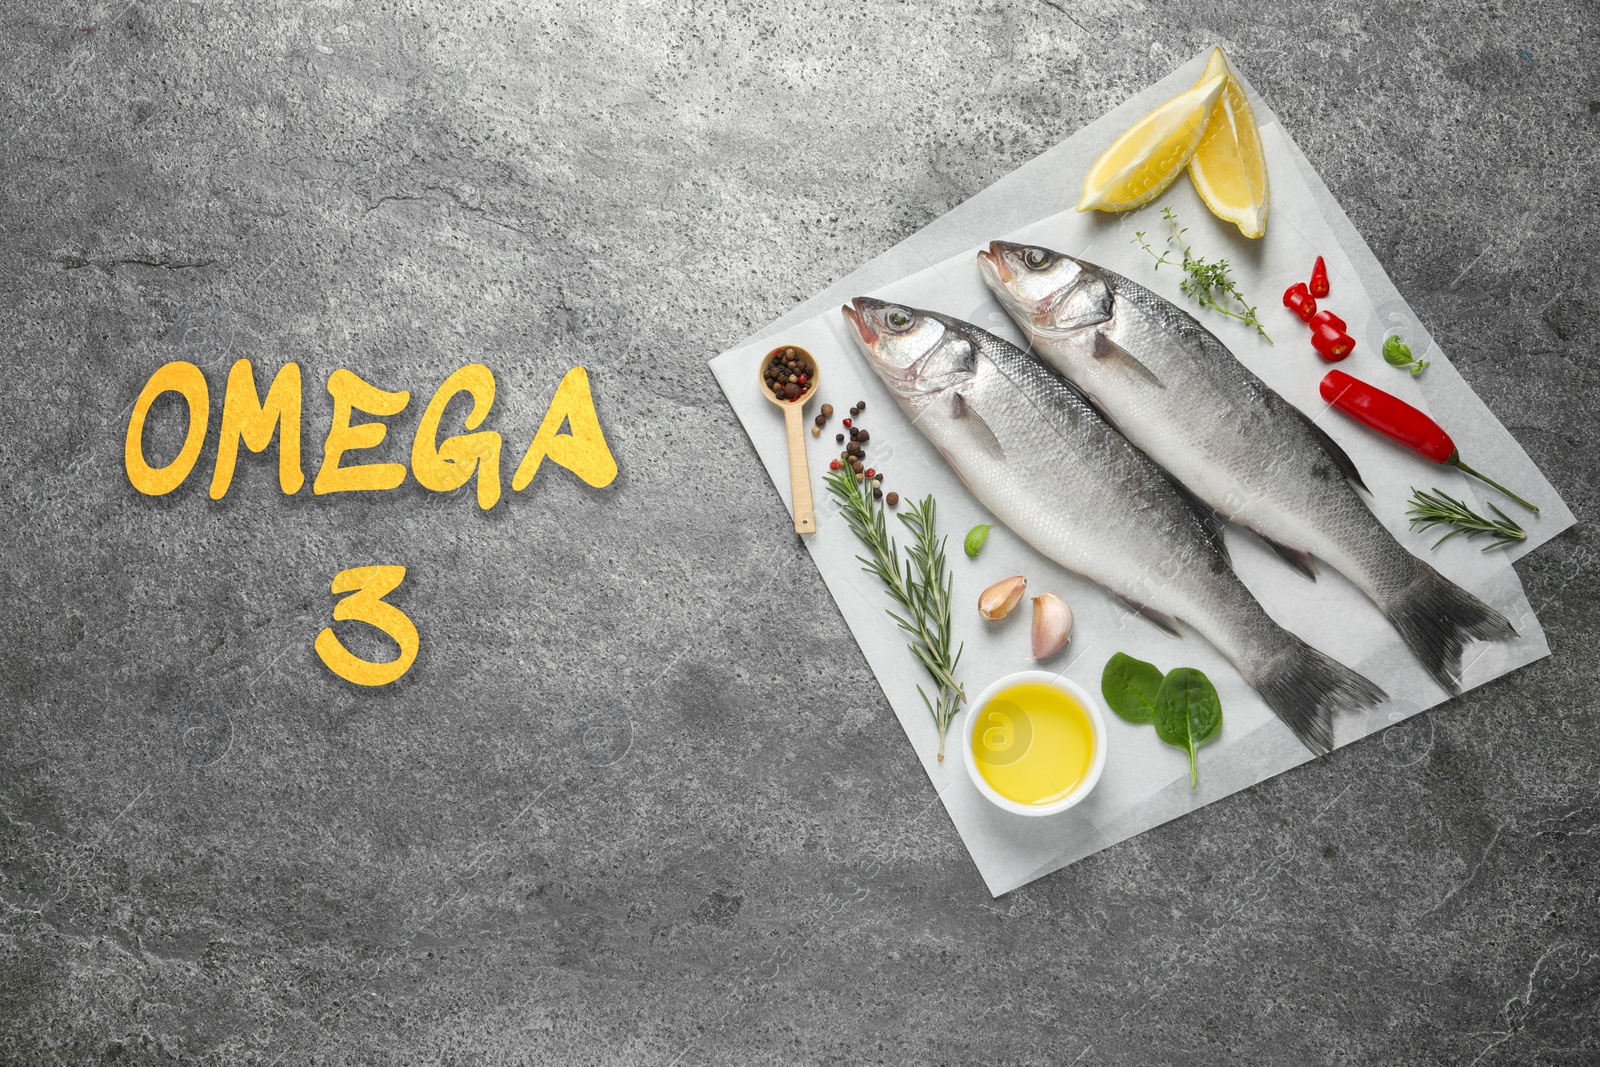 Image of Omega 3. Fresh fish, herbs and spices on grey table, top view